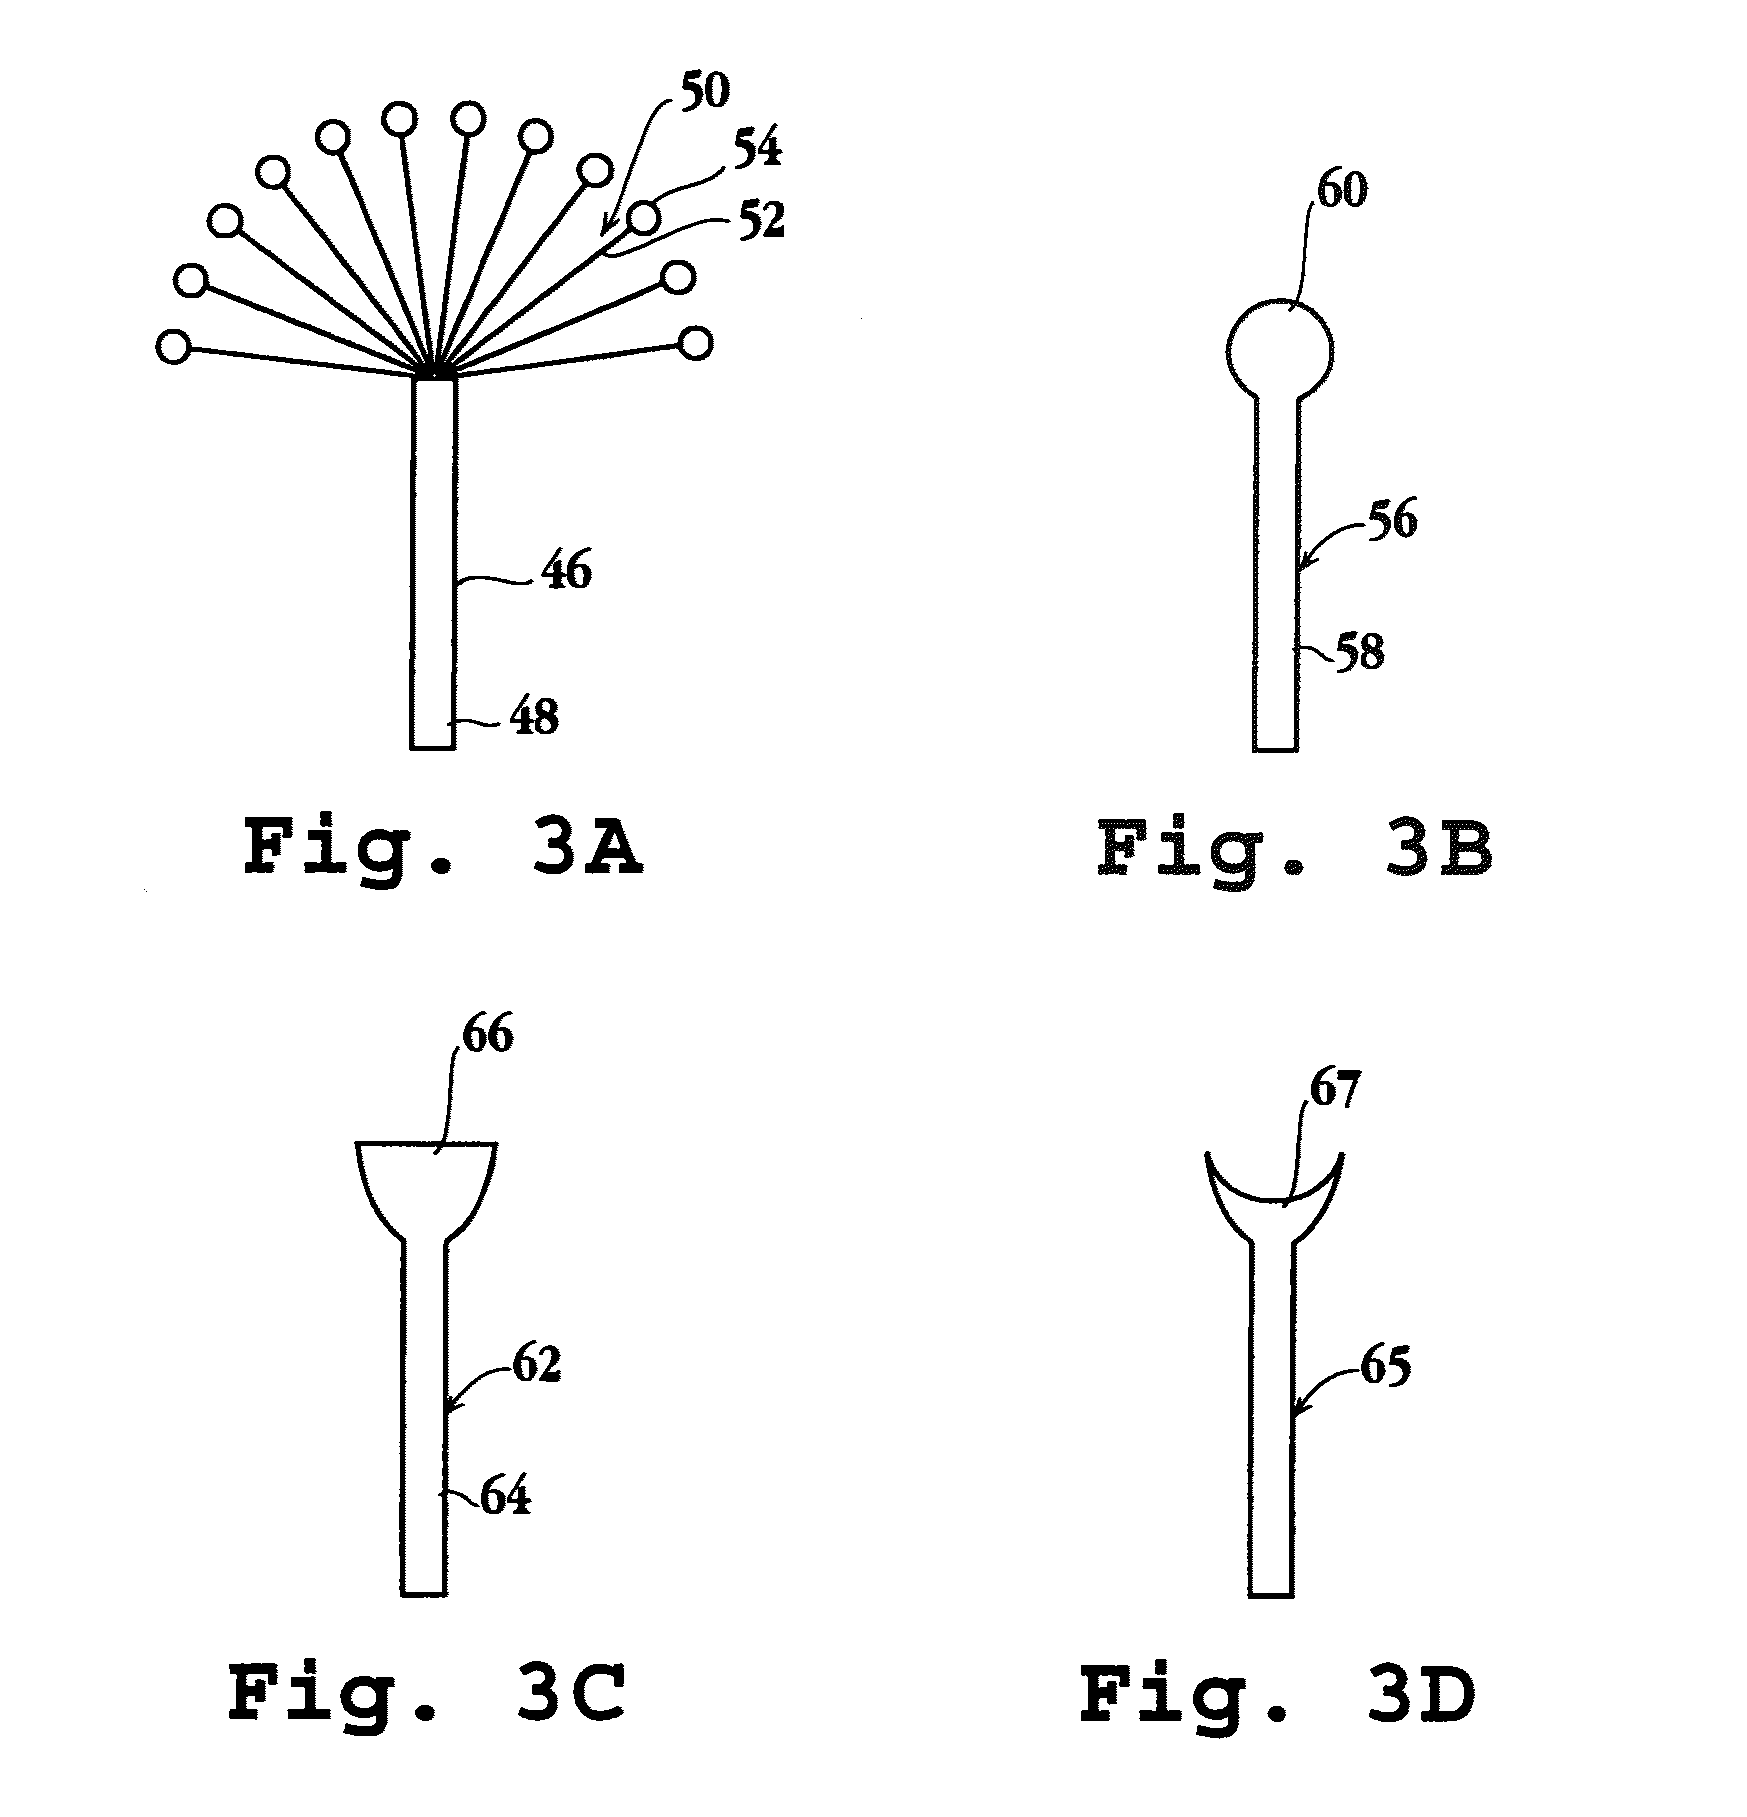 Self-cleaning adhesive structure and methods